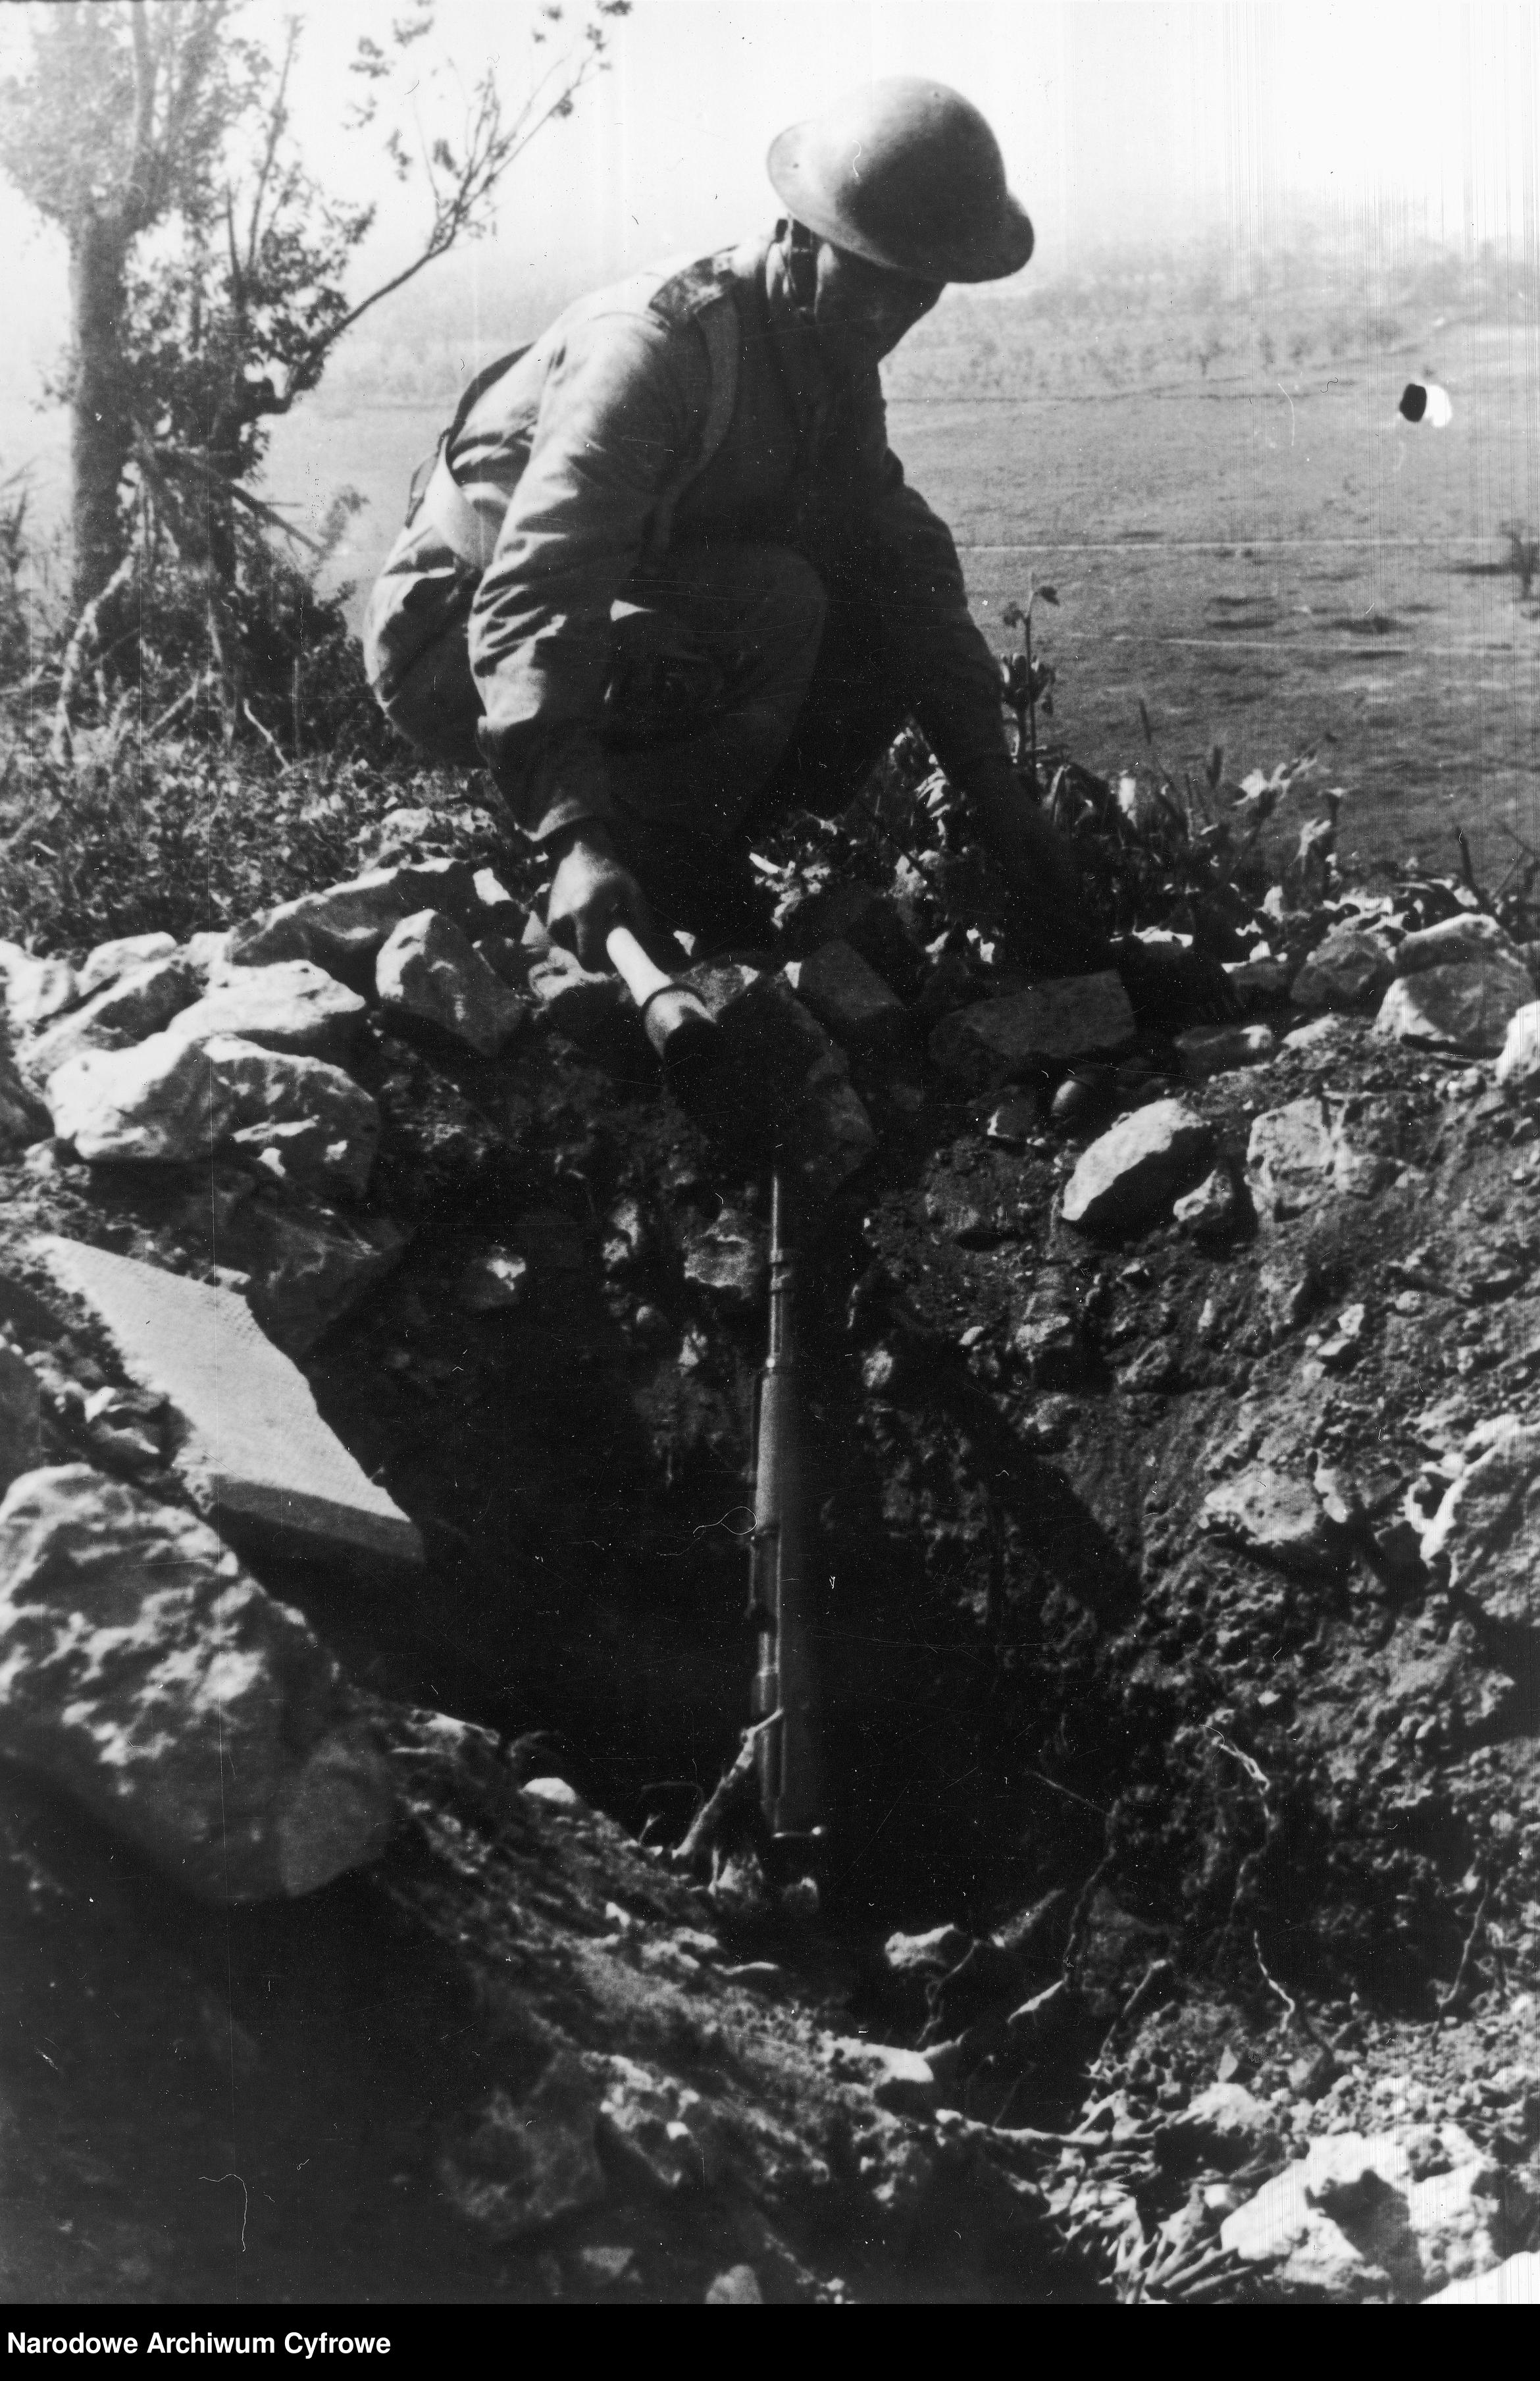 <p class='eng'>1944/05<br />One of the German defense positions. There is a Kar98k rifle in the pit and the soldier is holding a Stielhandgranate in his hand.<br />NAC 3/24/0/-/457/14</p>